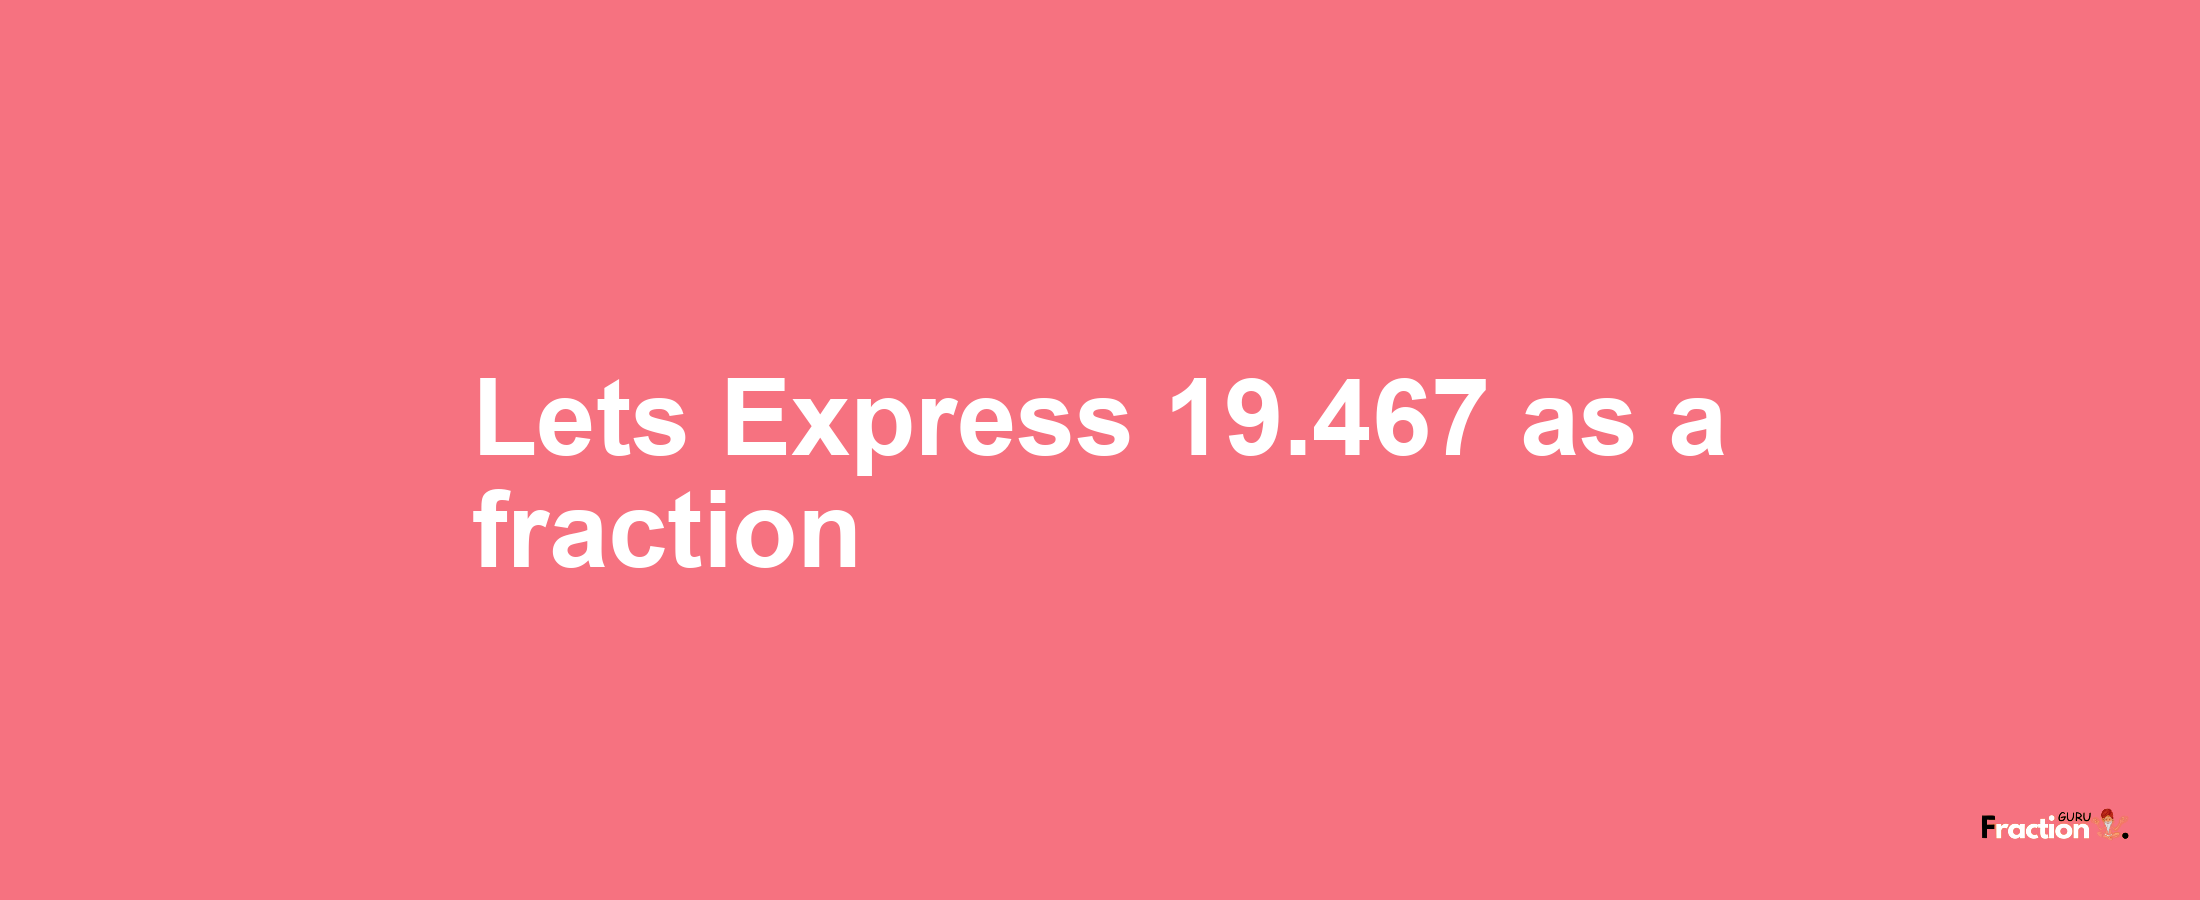 Lets Express 19.467 as afraction